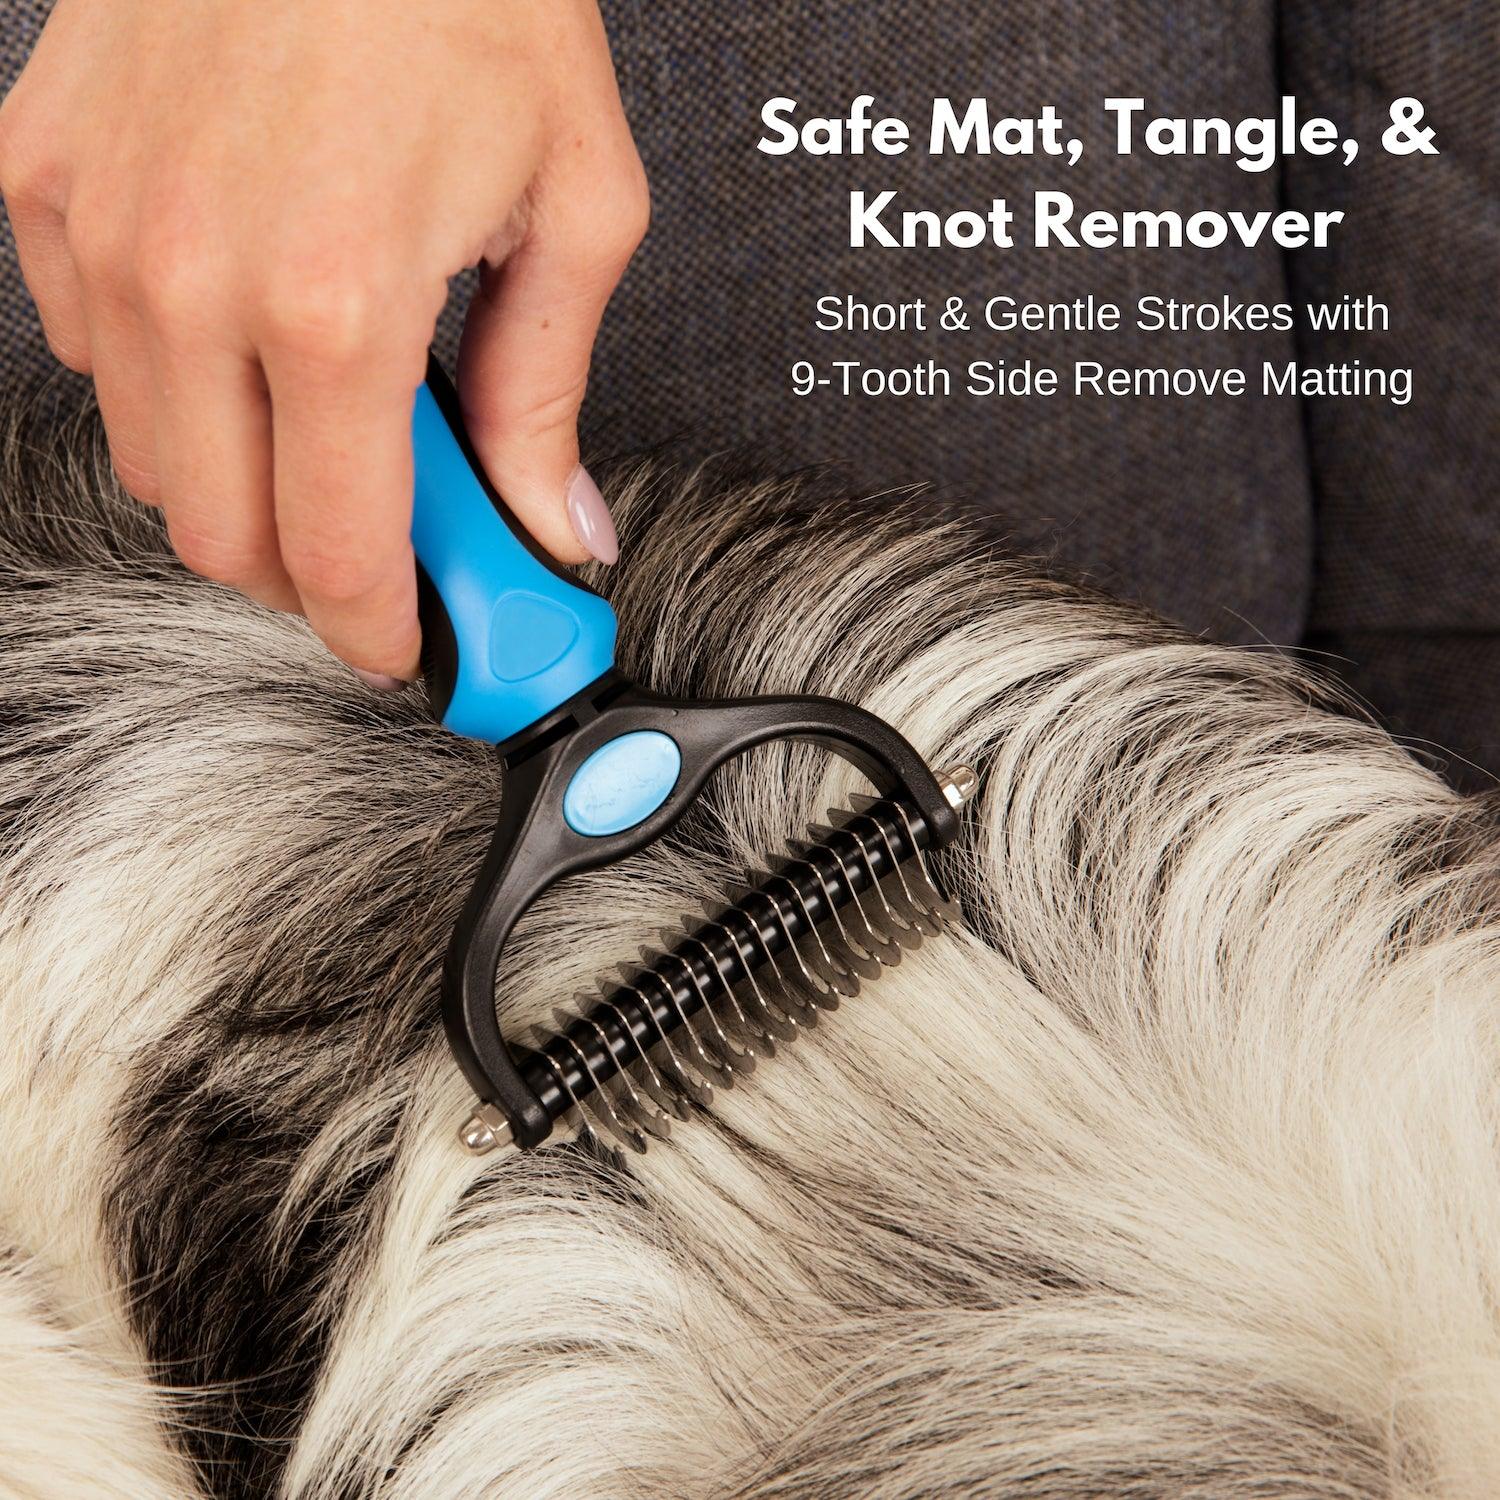 Safe mat, tangle, and knot remover